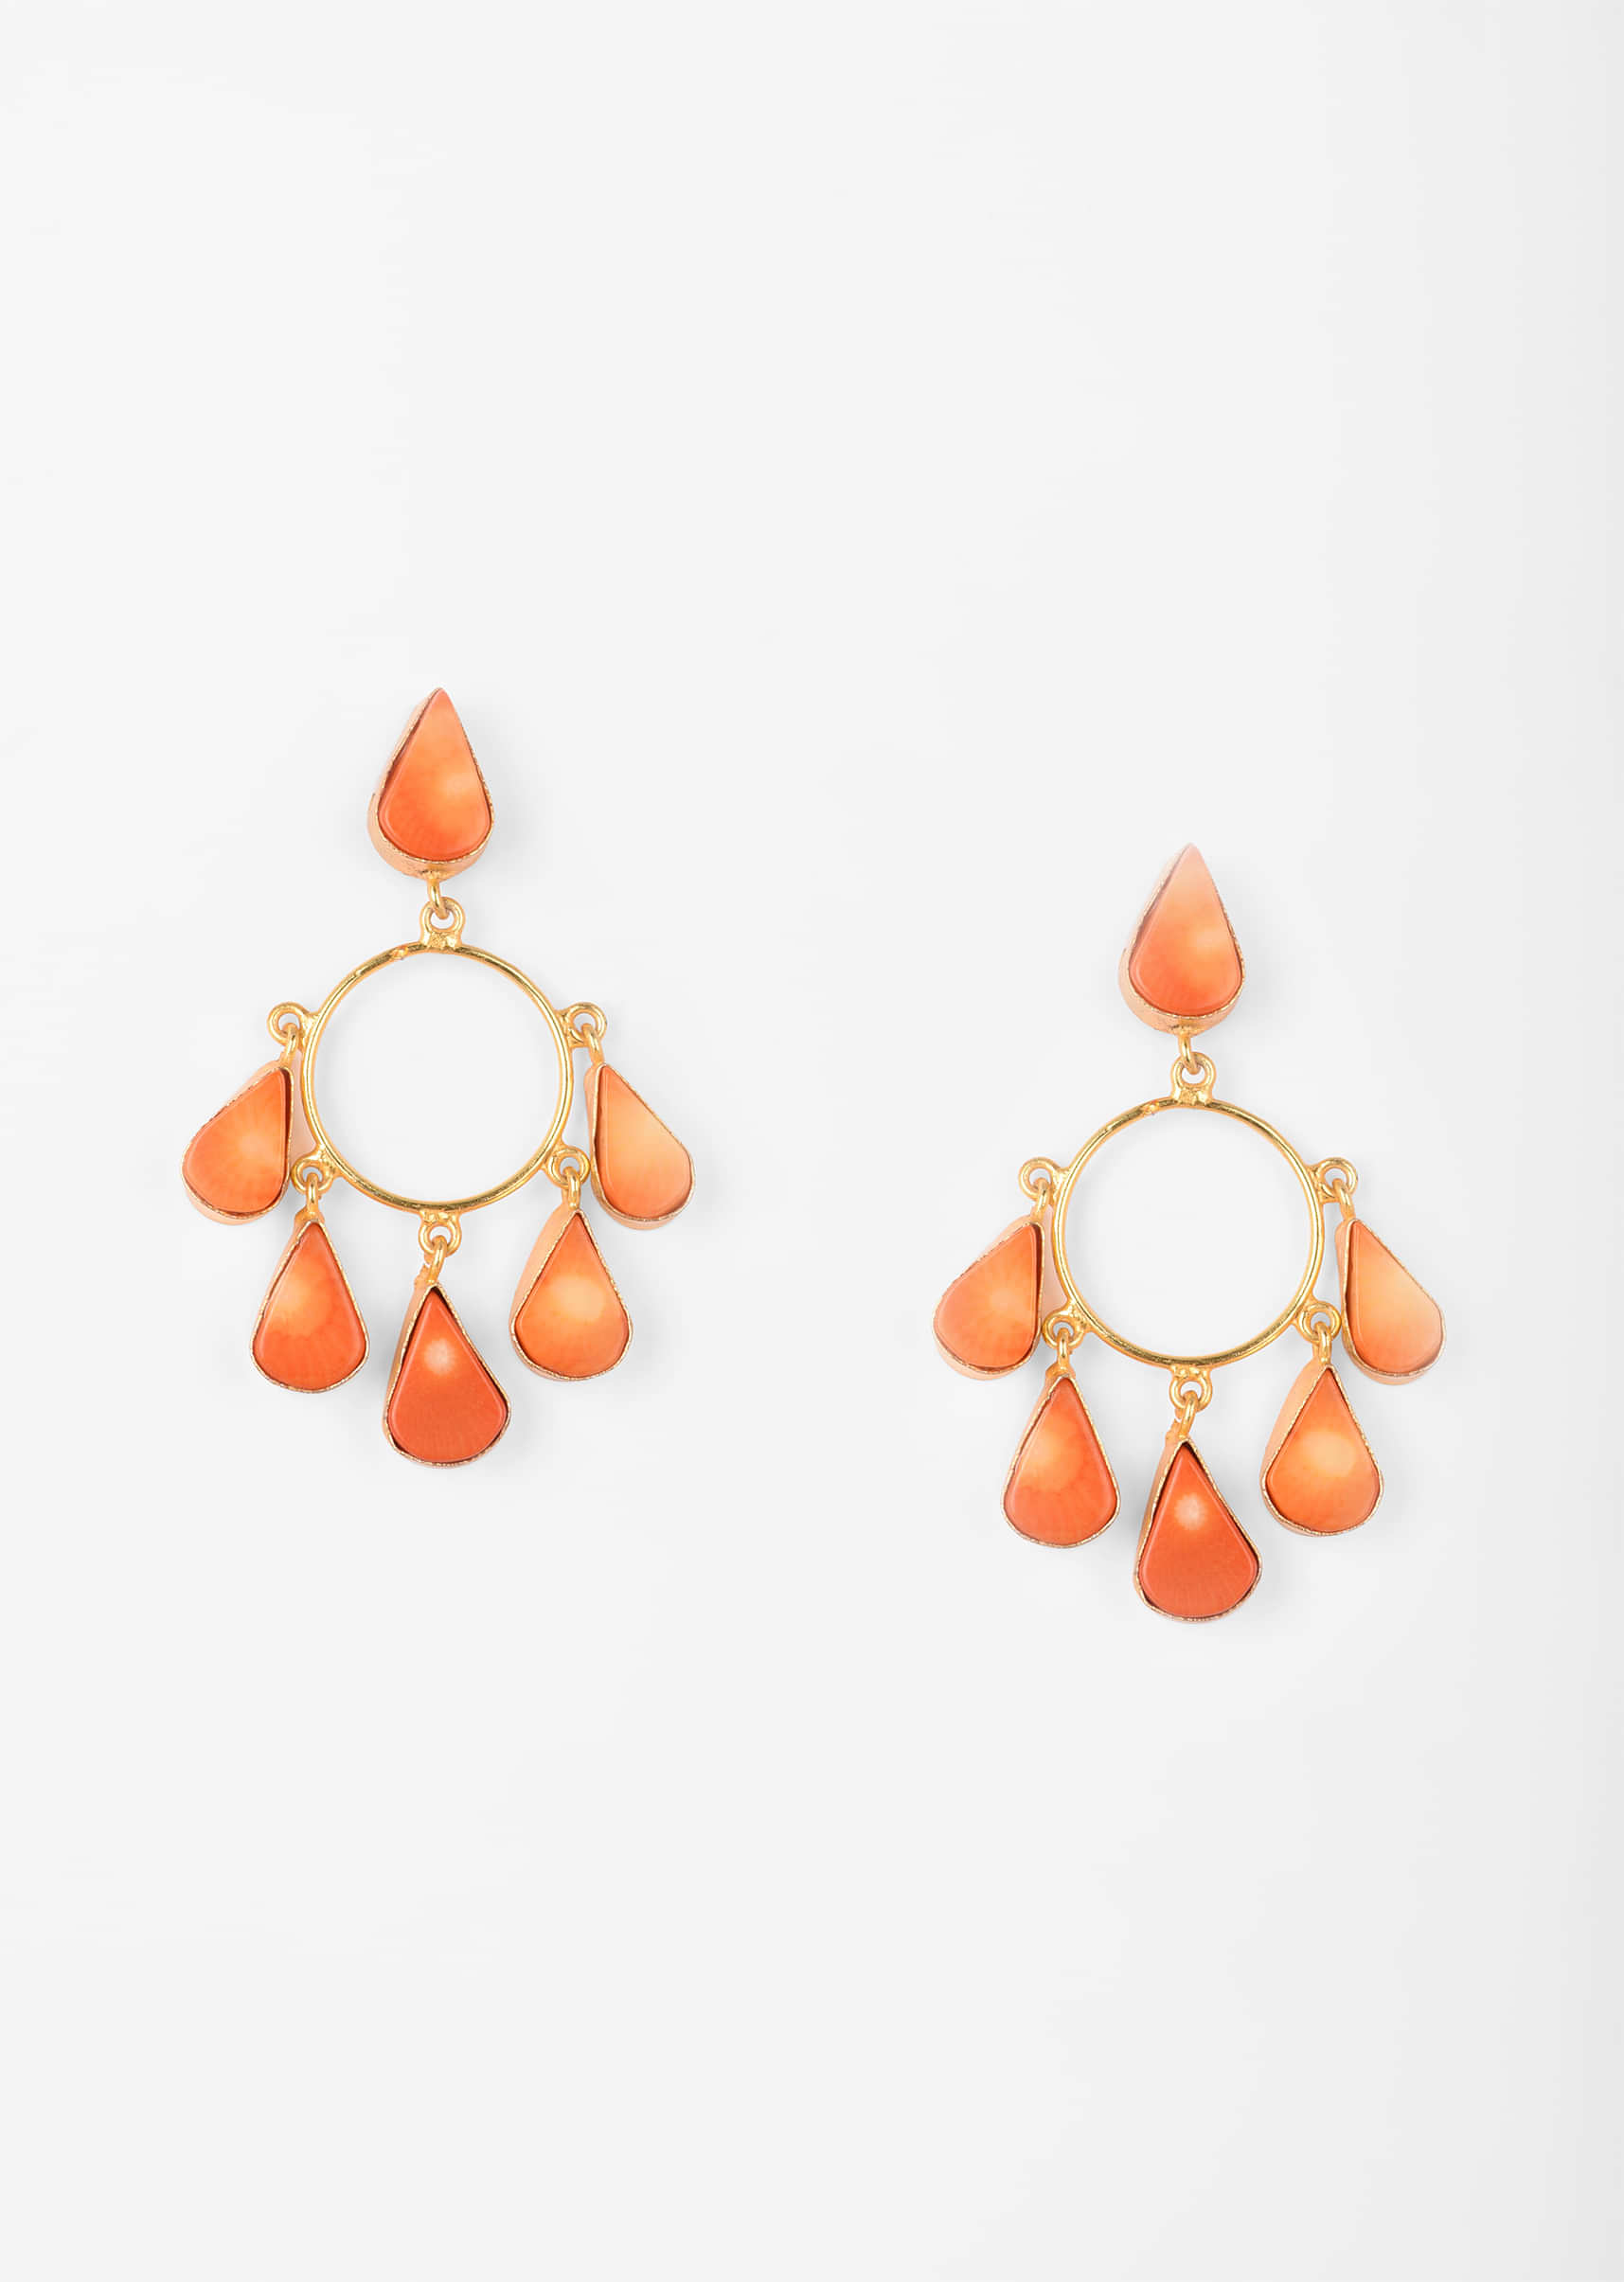 Gold Plated Earrings With Dangling Coral Semi Precious Stone Drops 